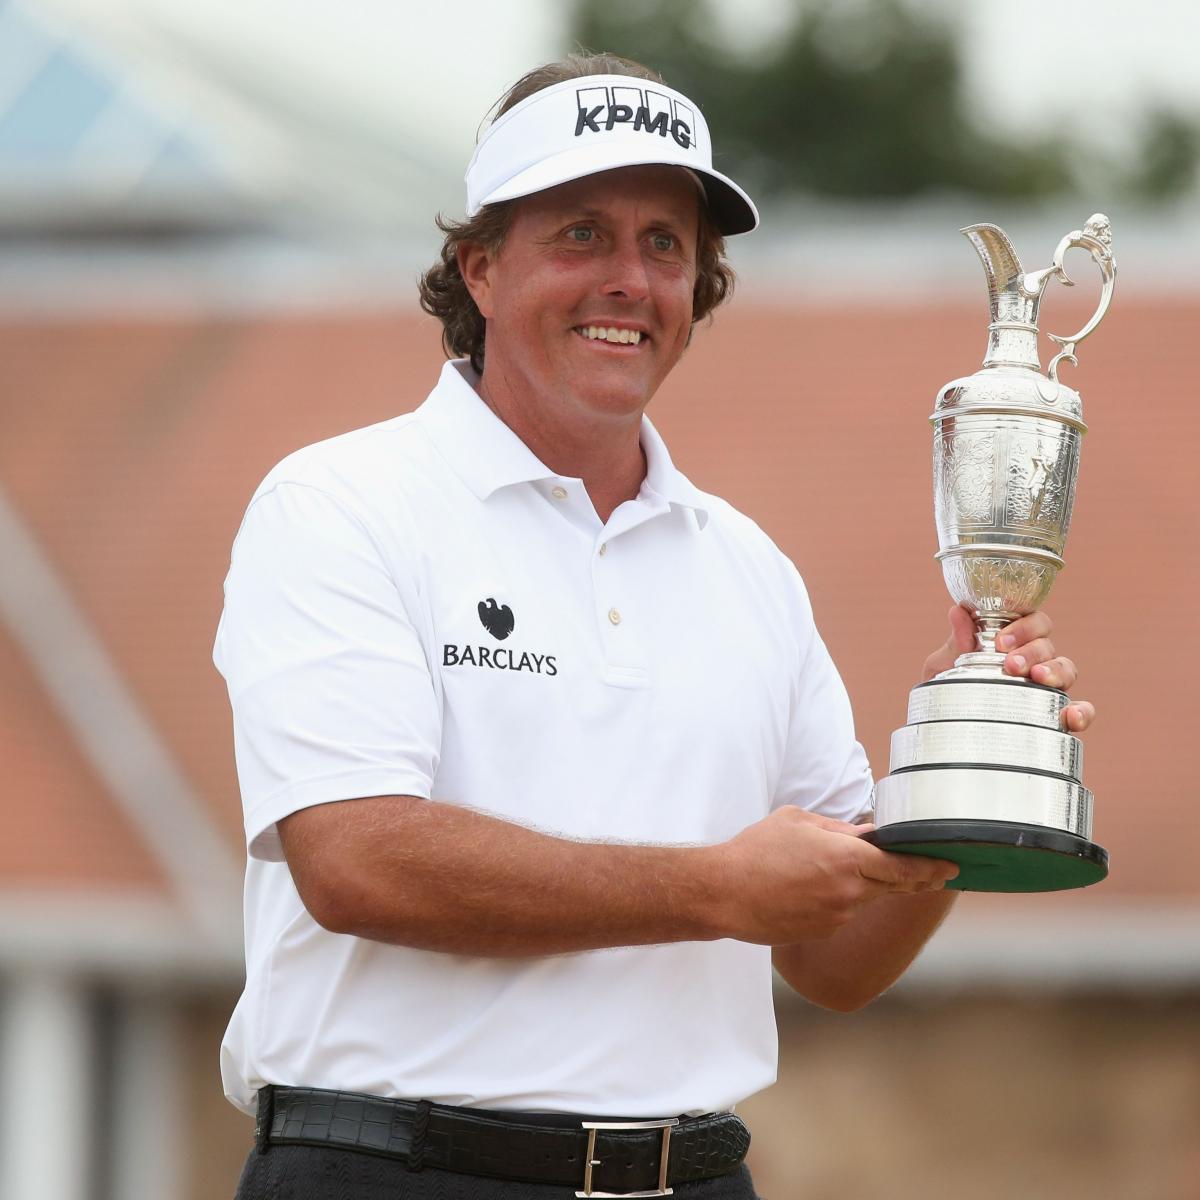 British Open Standings 2013 Top Finishers Who Will Shine at PGA